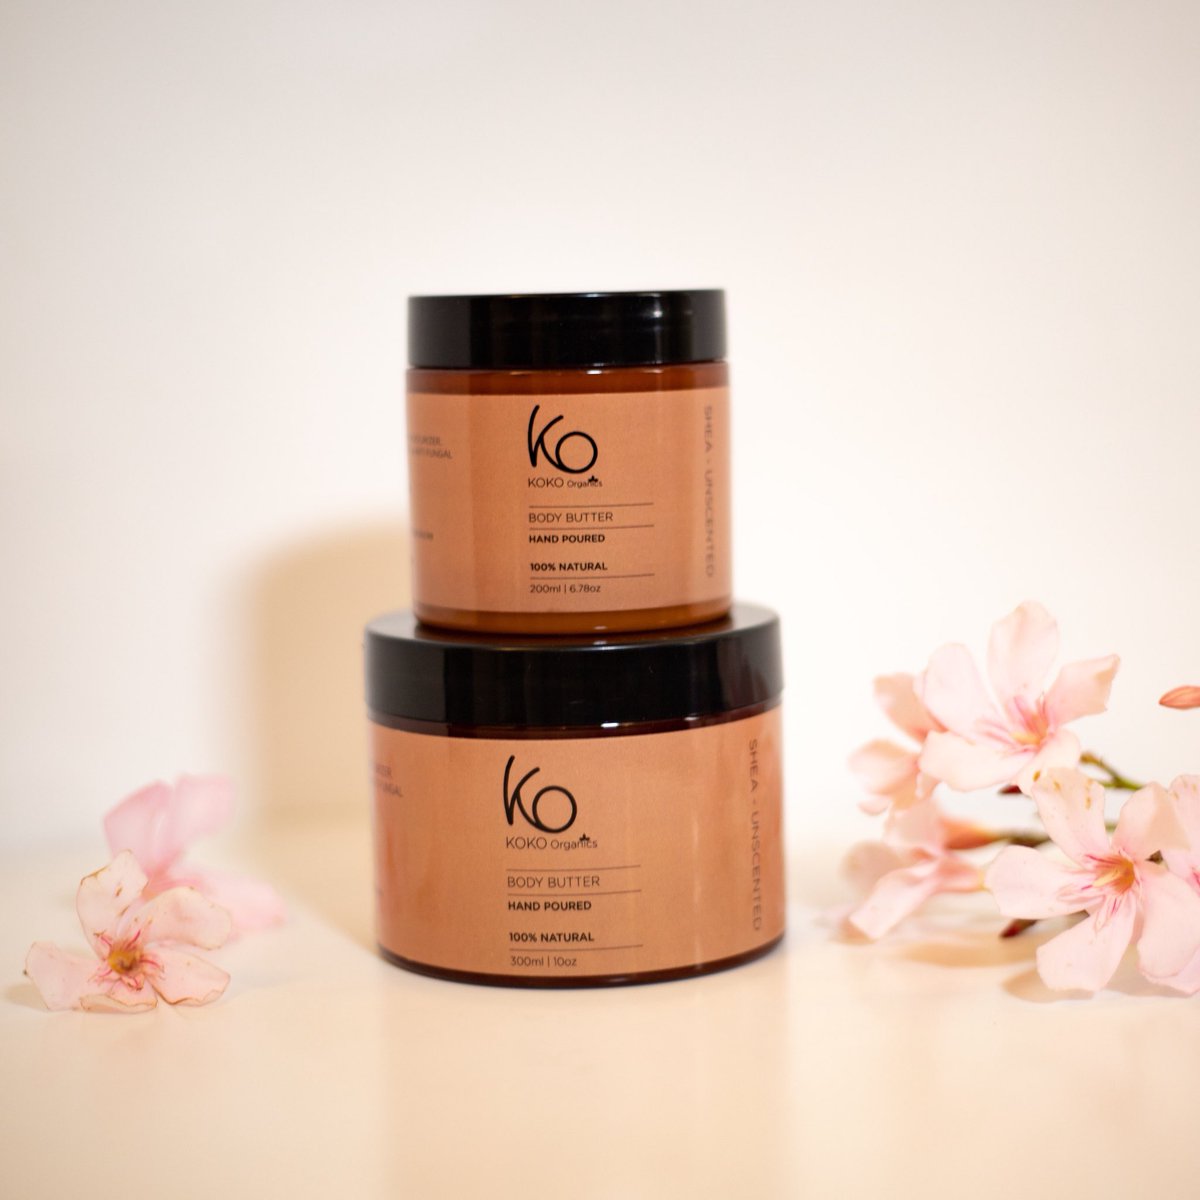 ✨KOKO Organics✨The latest addition to the KOKO family! 💚🍃 

Our Pure Cold Pressed Shea Butter is now available in 200ml and 300ml jars.

#SheaButter #PureSheaButter #ColdPressed #ColdPressedSheaButter #SkinCare #HairCare #HandPoured